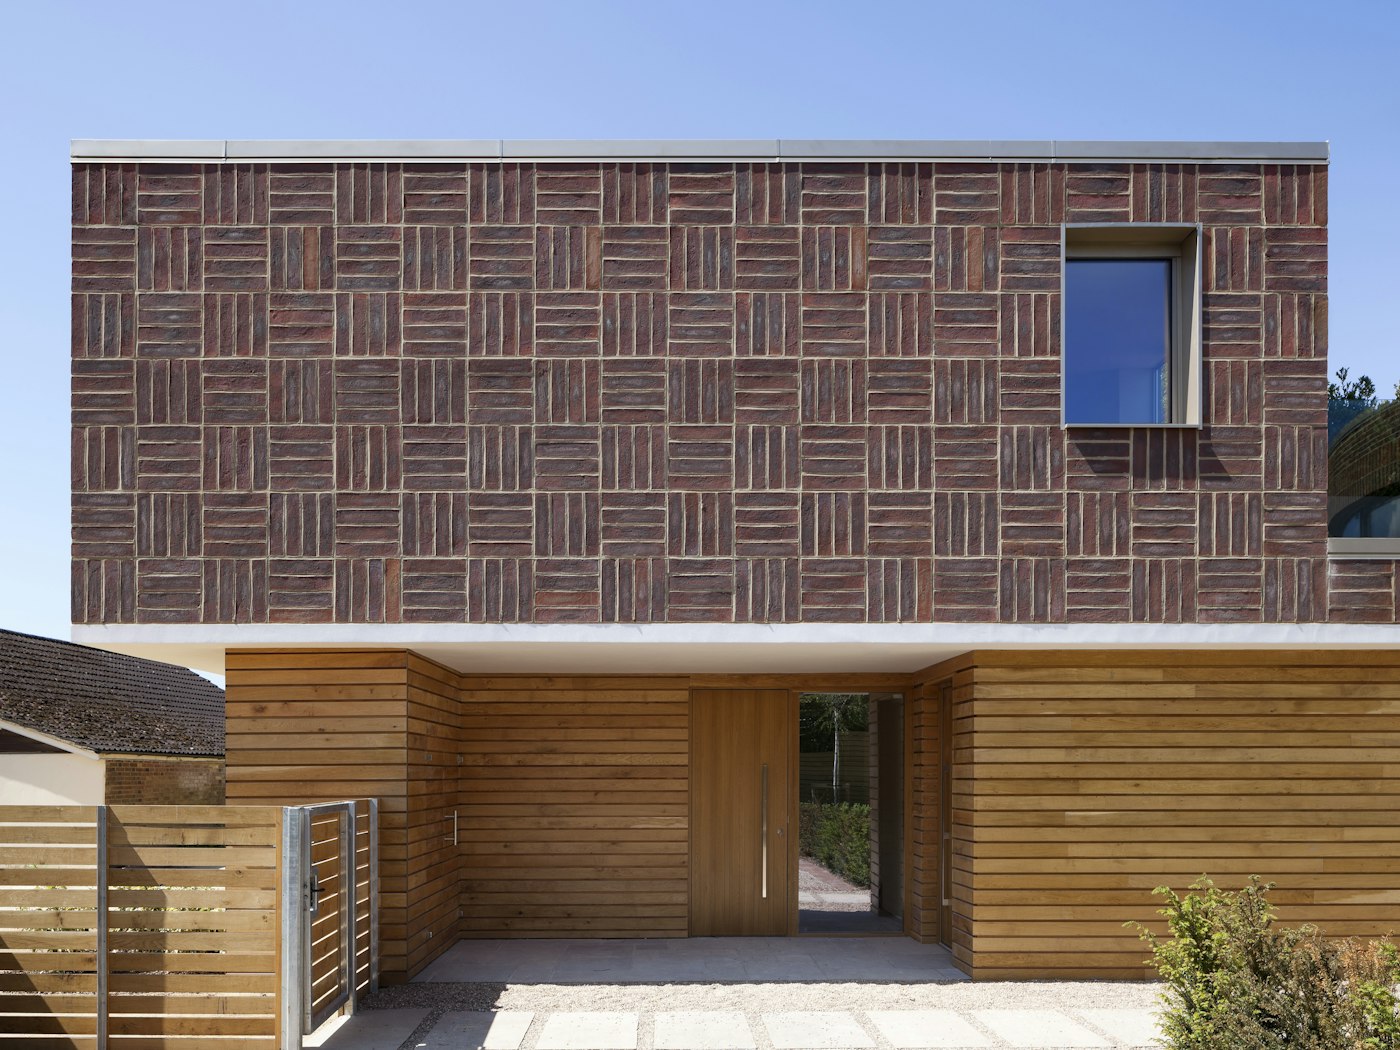 Far from boring, the careful design of this house uses red brick in a thoroughly modern way